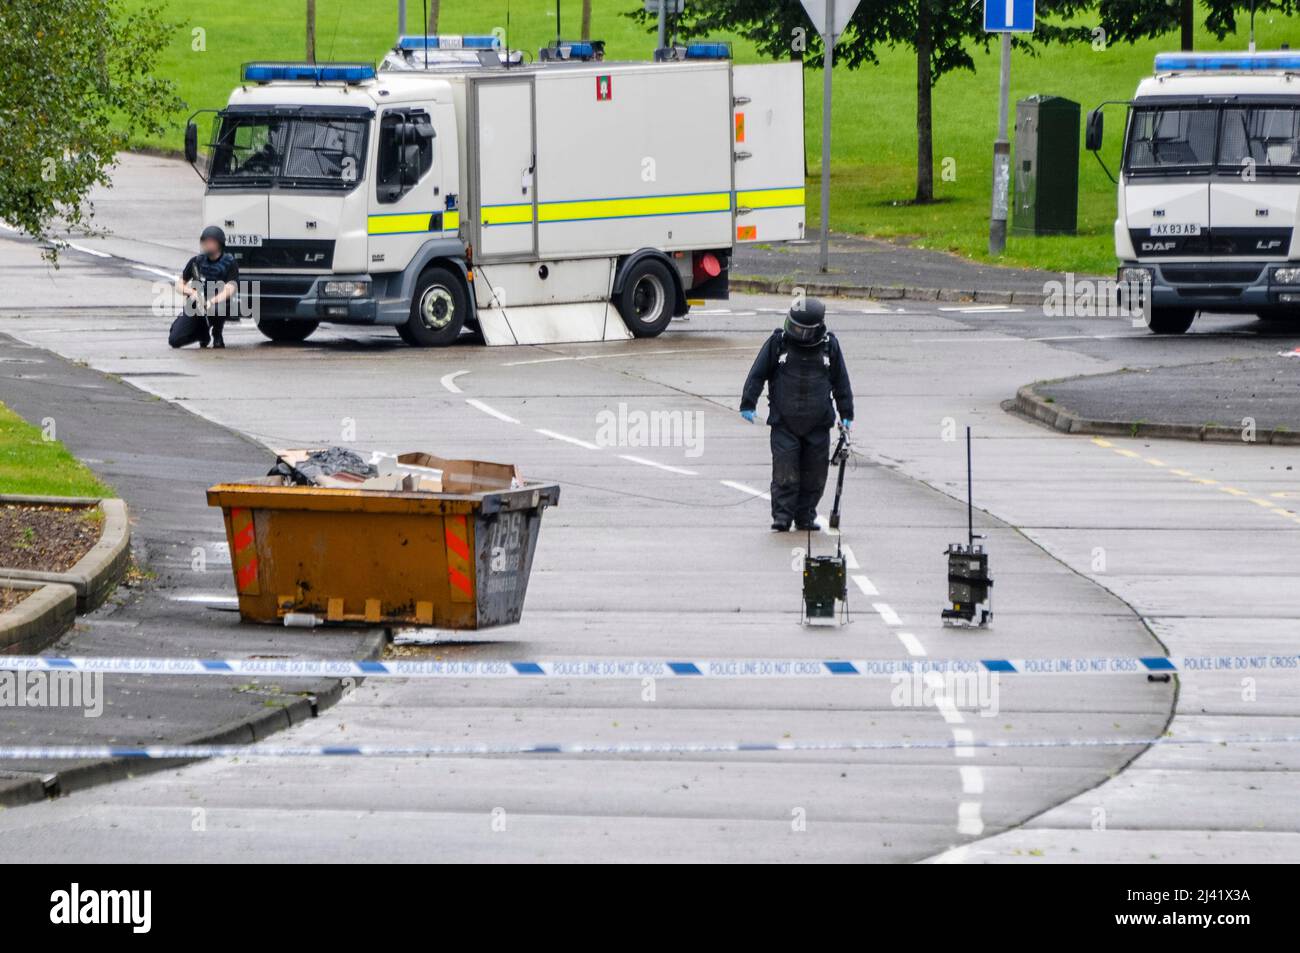 Belfast, Northern Ireland. 11th September 2013 - An army ATO approaches an object found on a residential street in the Twinbrook area of West Belfast, with an armed soldier behind him providing cover.  PSNI have confirmed it was a viable device which has been taken away for examination. Stock Photo